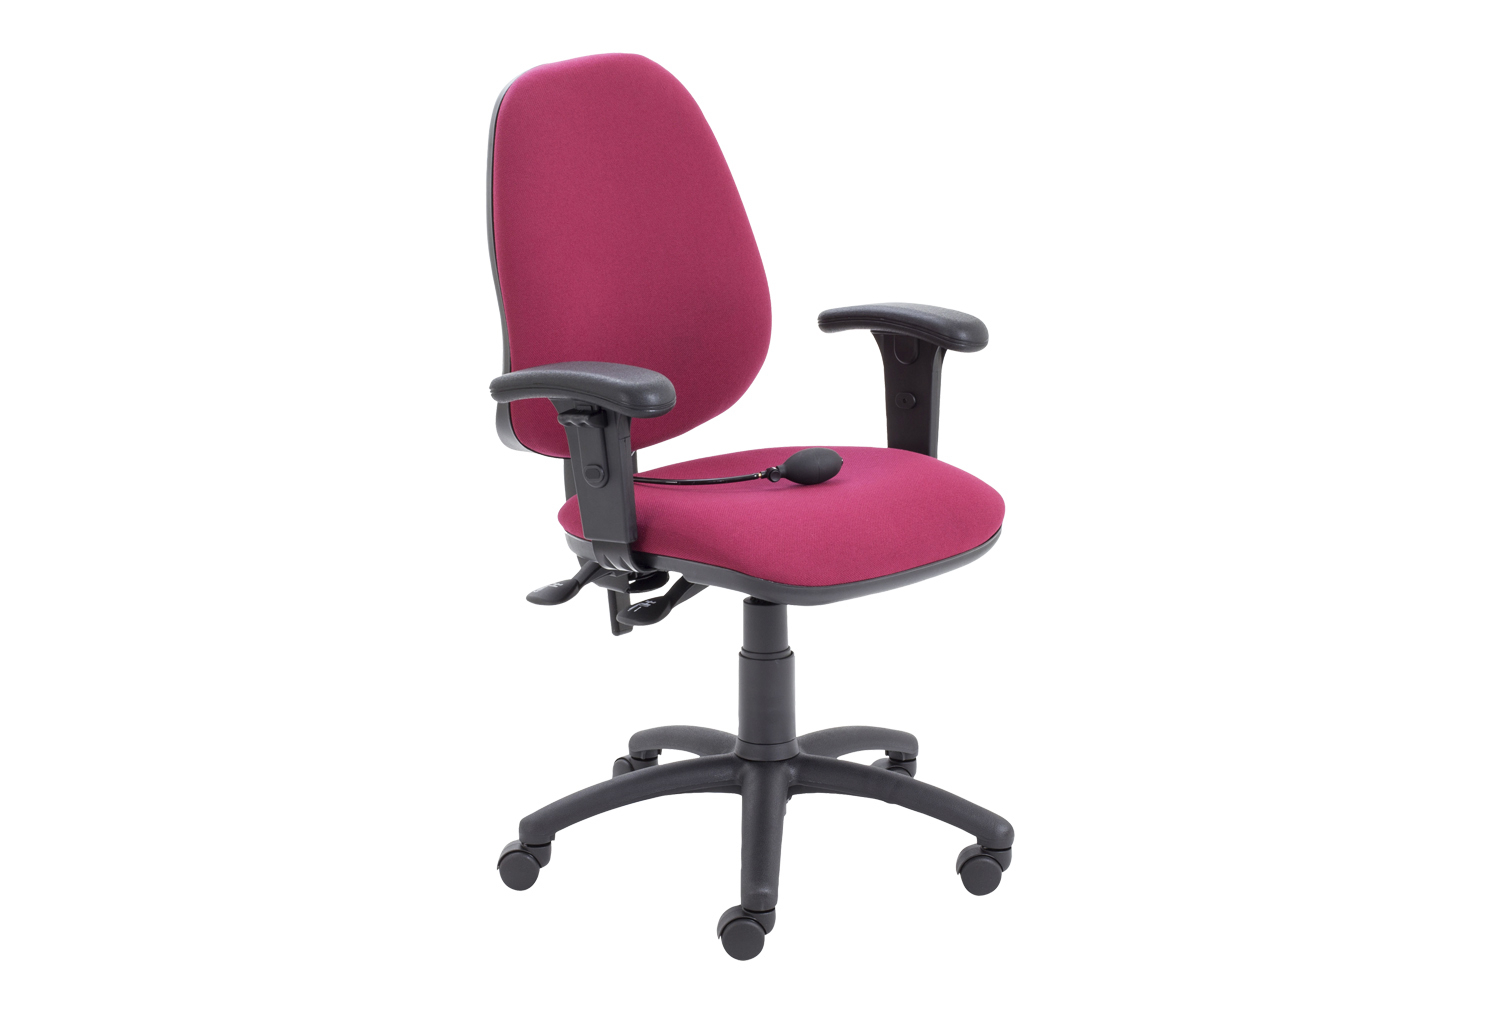 Orchid Lumbar Pump Ergonomic Operator Office Chair With Height Adjustable Arms, Burgundy, Express Delivery